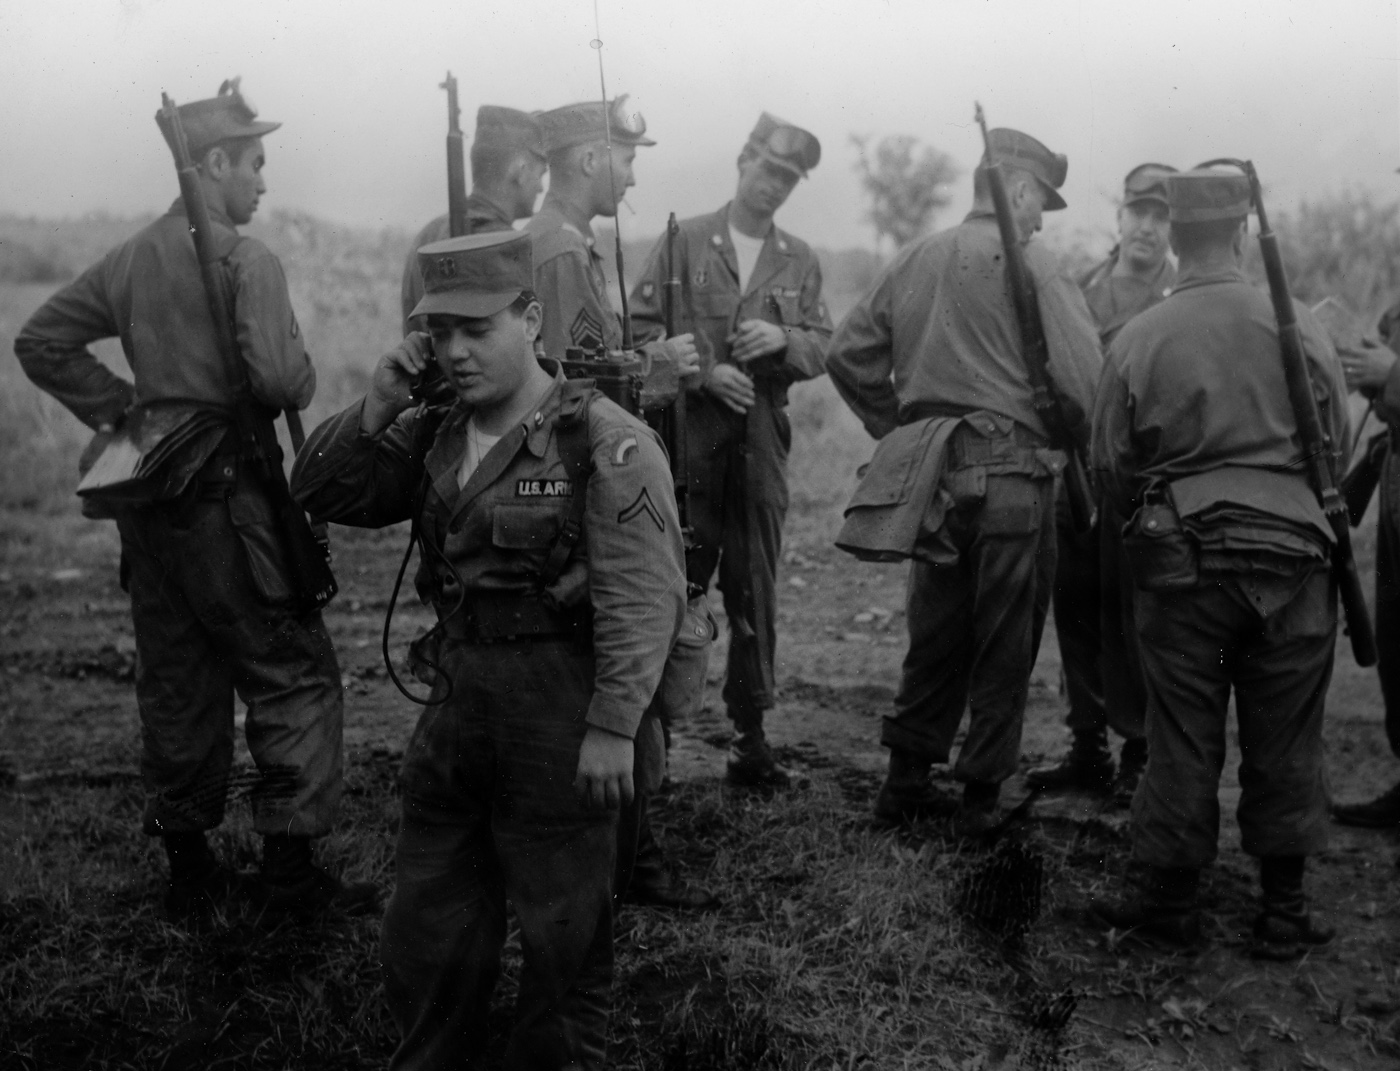 This is the I&R Platoon, 71st Regiment, 42nd Infantry Division, New York National Guard at Fort Drum in 1954 serving as the enemy for maneuver training. Donald McKenna is the soldier in the center of the picture. View full size.